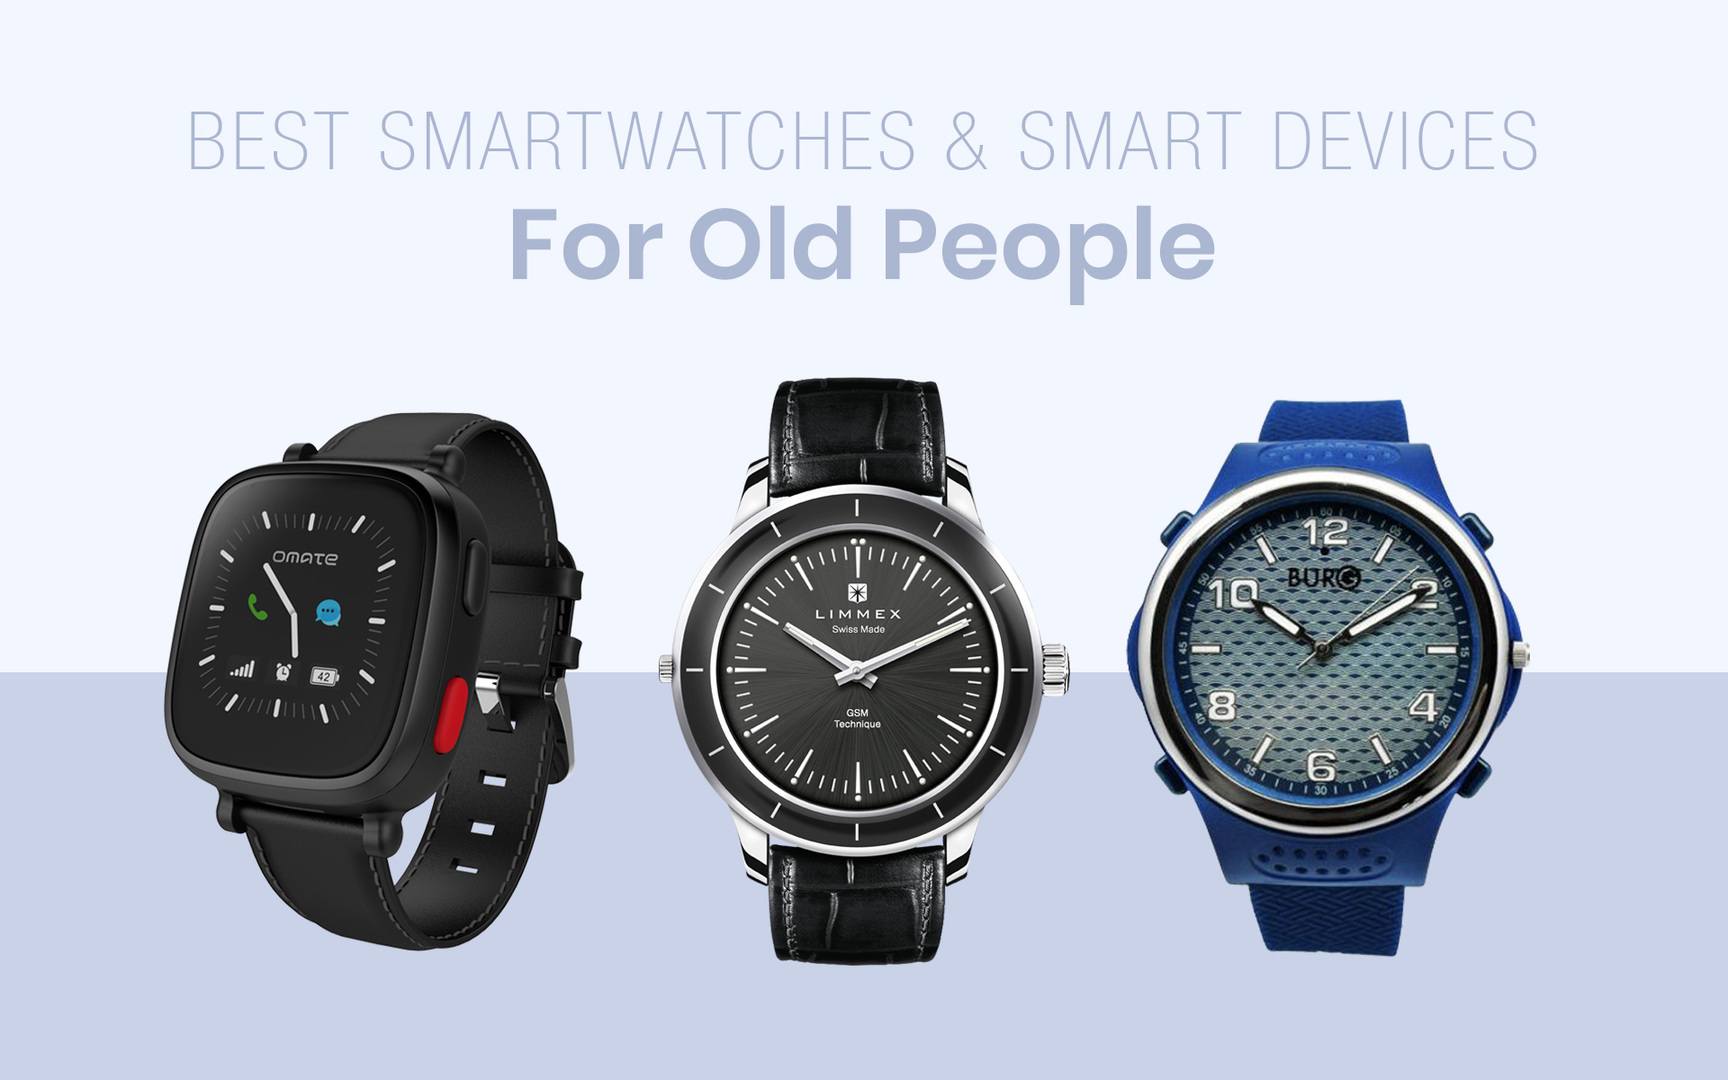 Best Smartwatches & Smart Devices For Old People